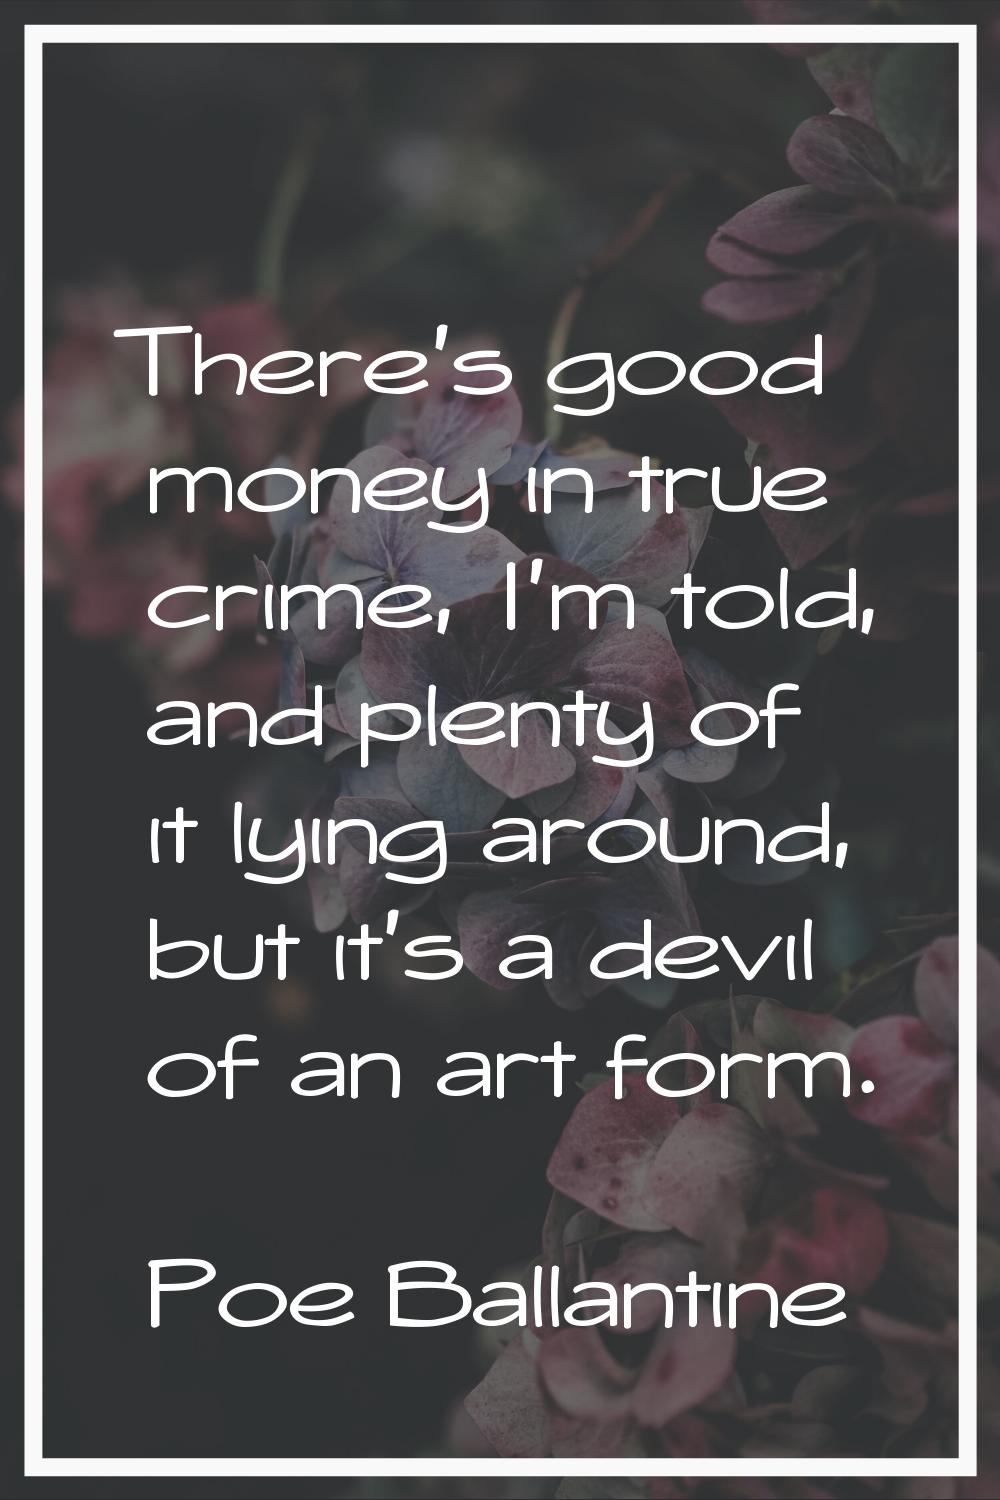 There's good money in true crime, I'm told, and plenty of it lying around, but it's a devil of an a